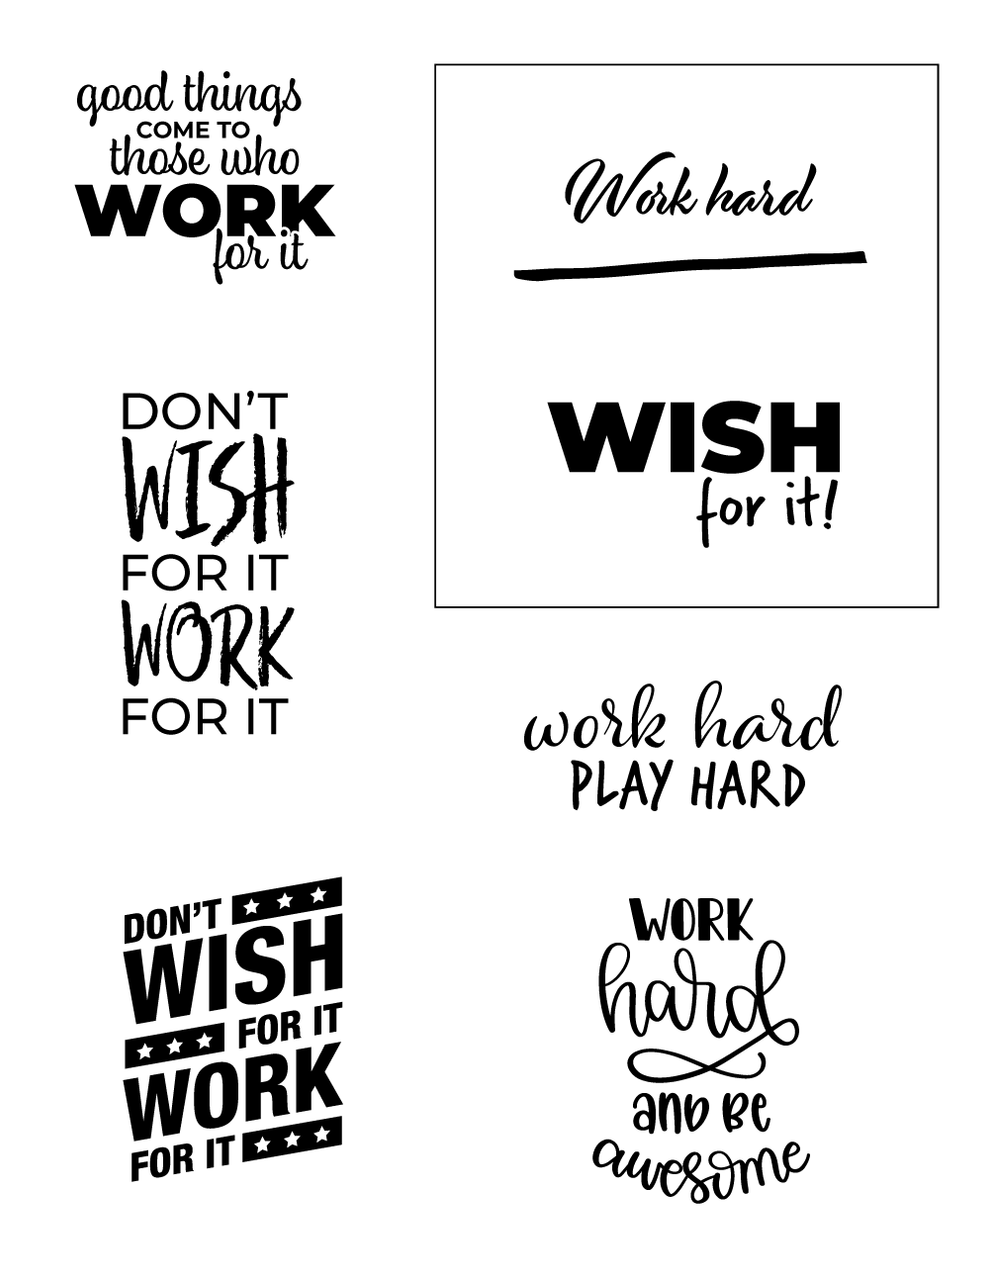 https://cdn11.bigcommerce.com/s-8631rjfpbo/images/stencil/1280x1280/products/118/434/Labor_Day_Work_Hard_Artwork__02642.1605811221.png?c=2